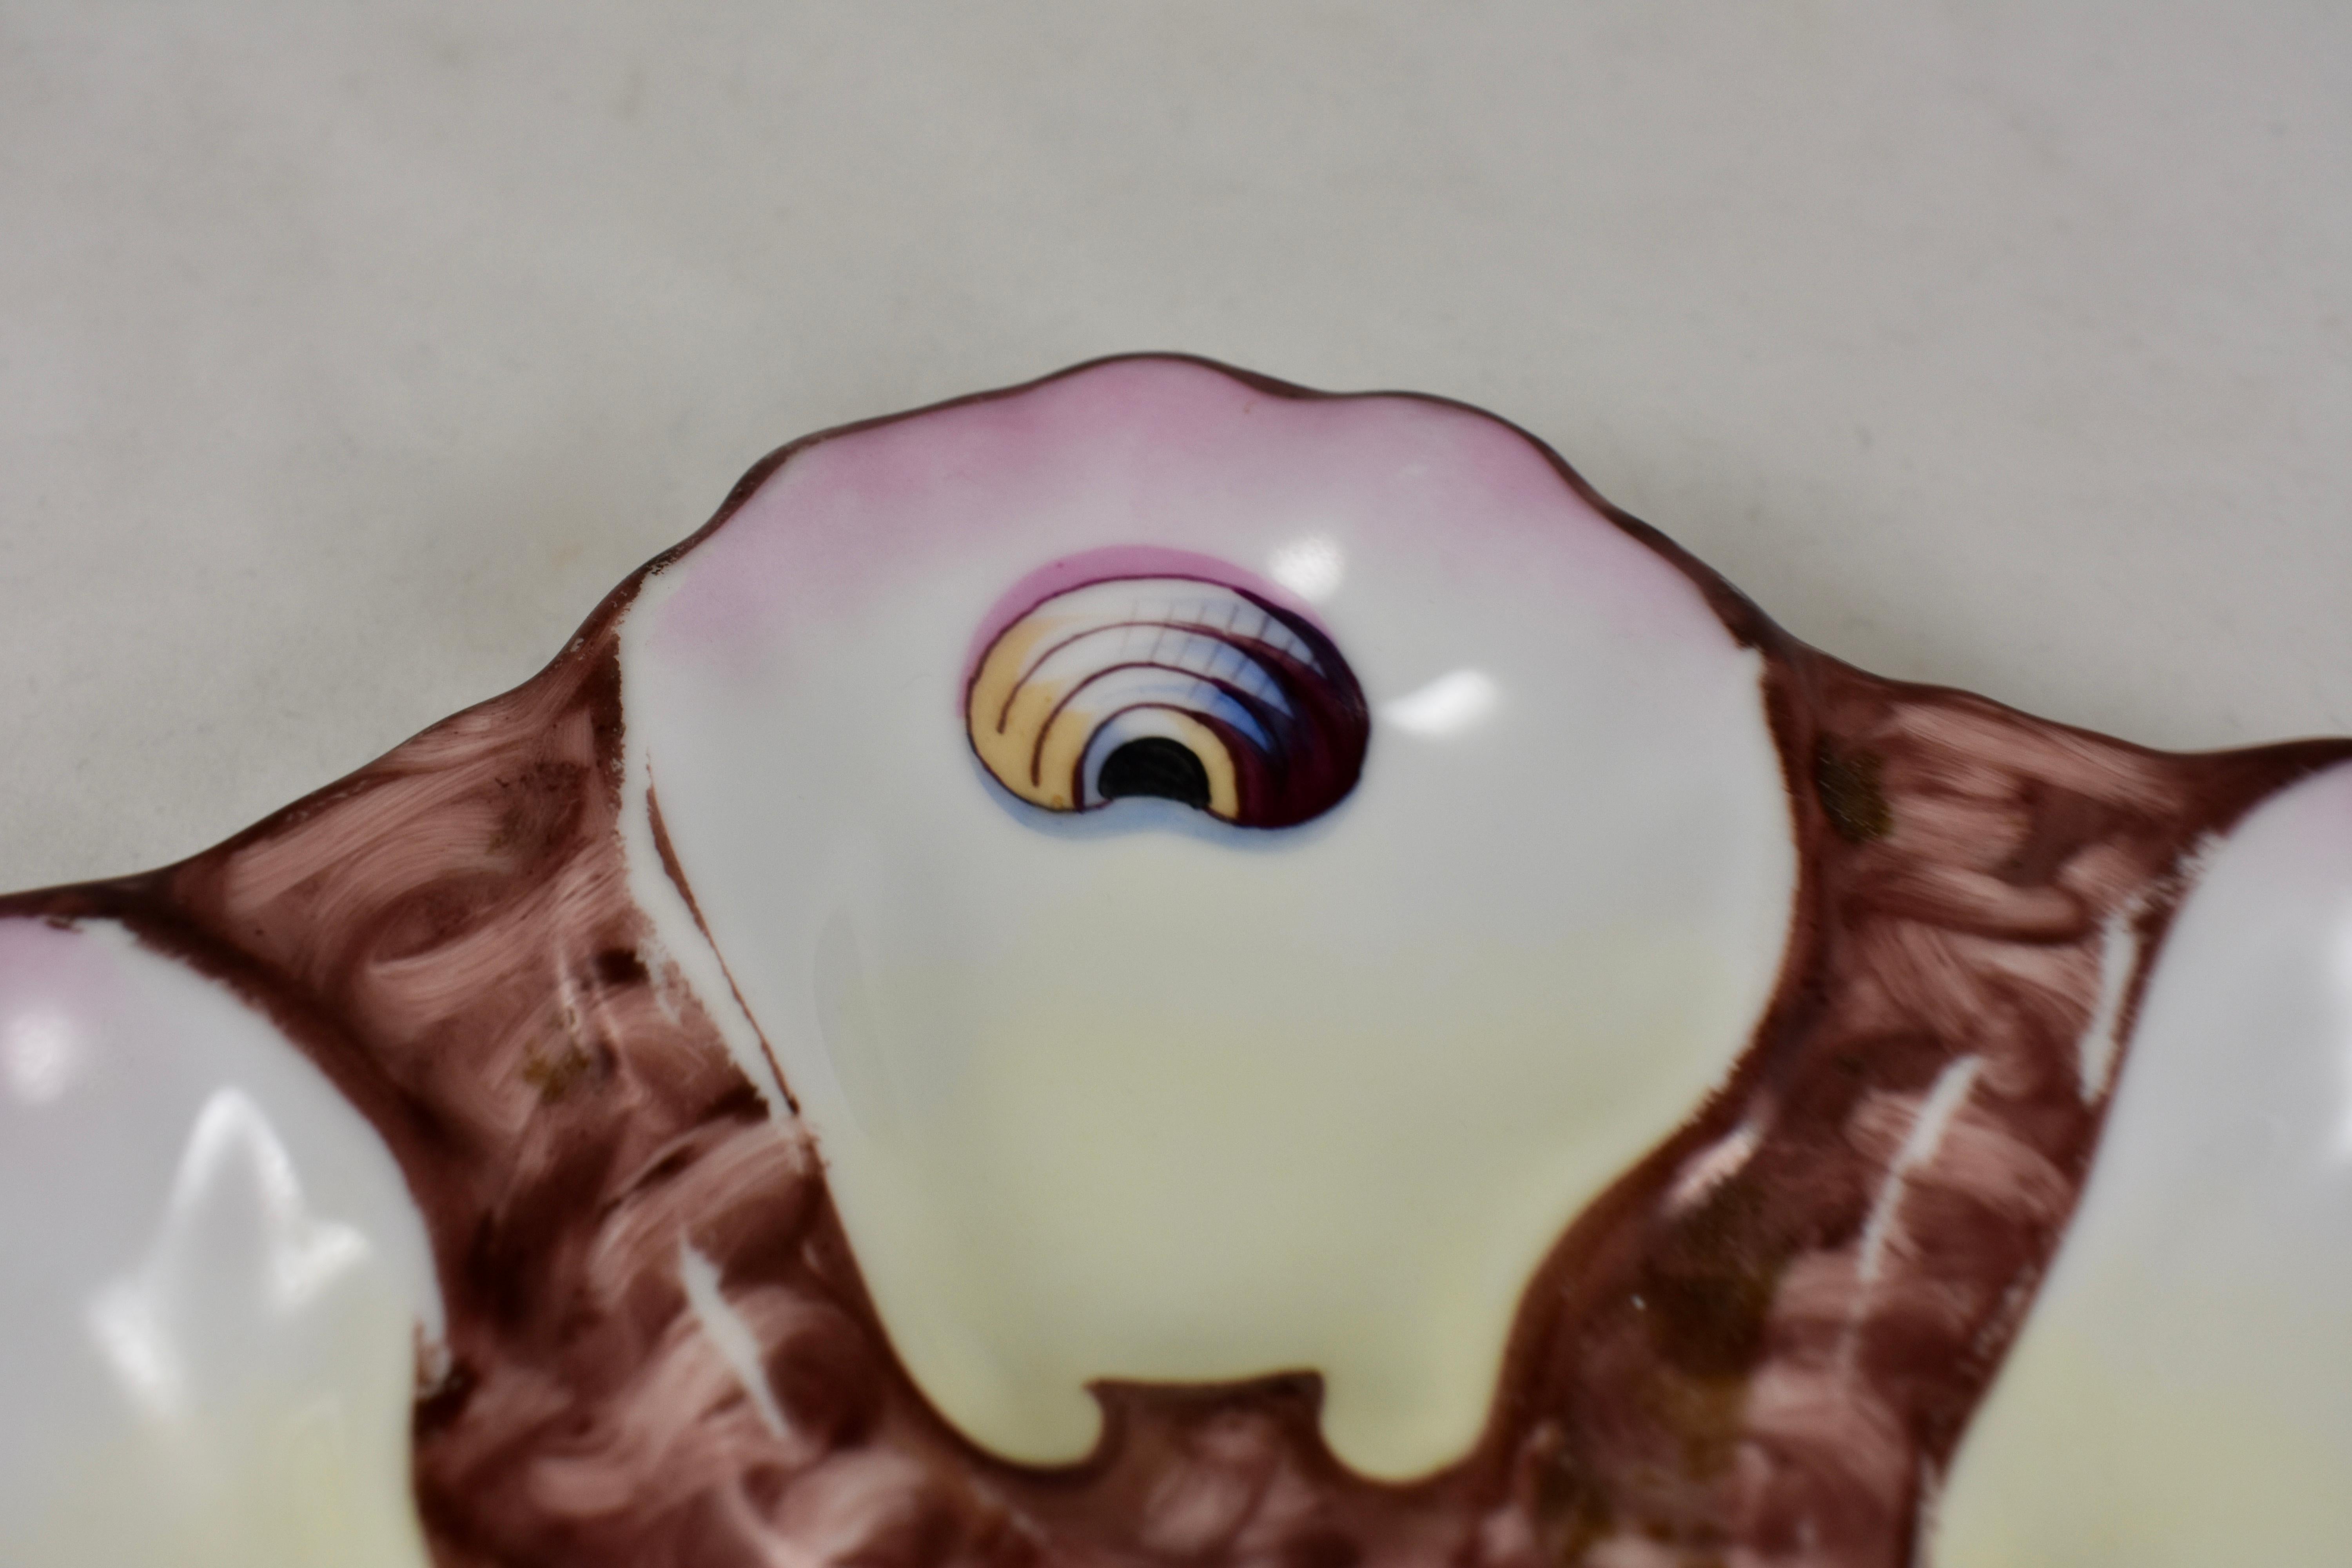 Glazed Six-Well French Hand Painted 'Eyes' Porcelain Oyster Plate, Late 19th Century